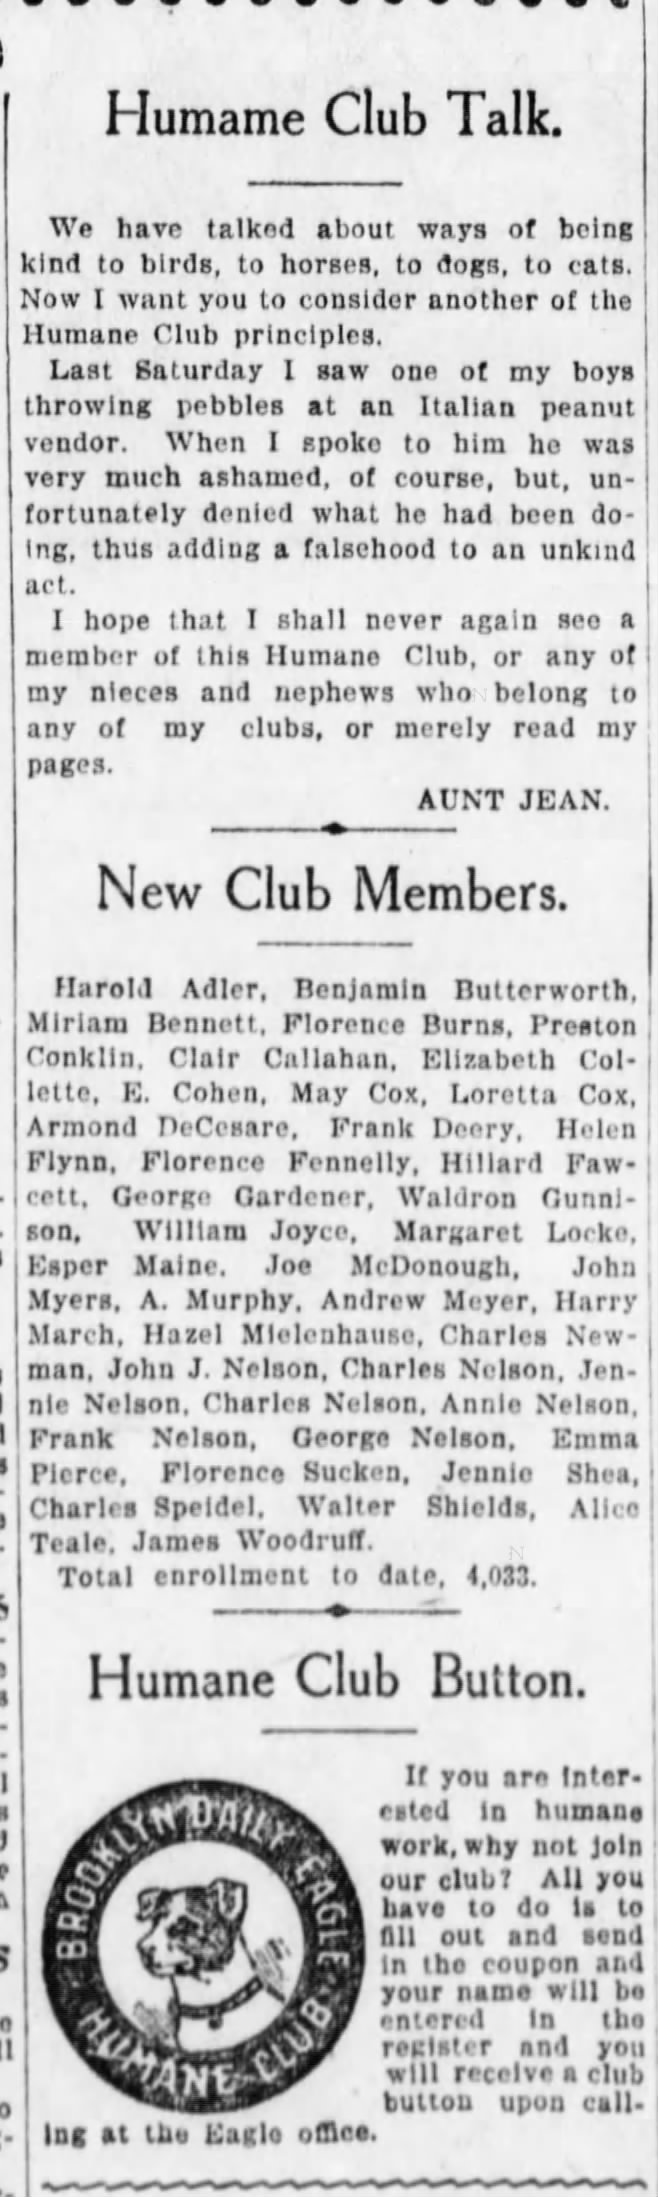 Many Nelsons become members of the Humane Club dated 25 Oct 1906.